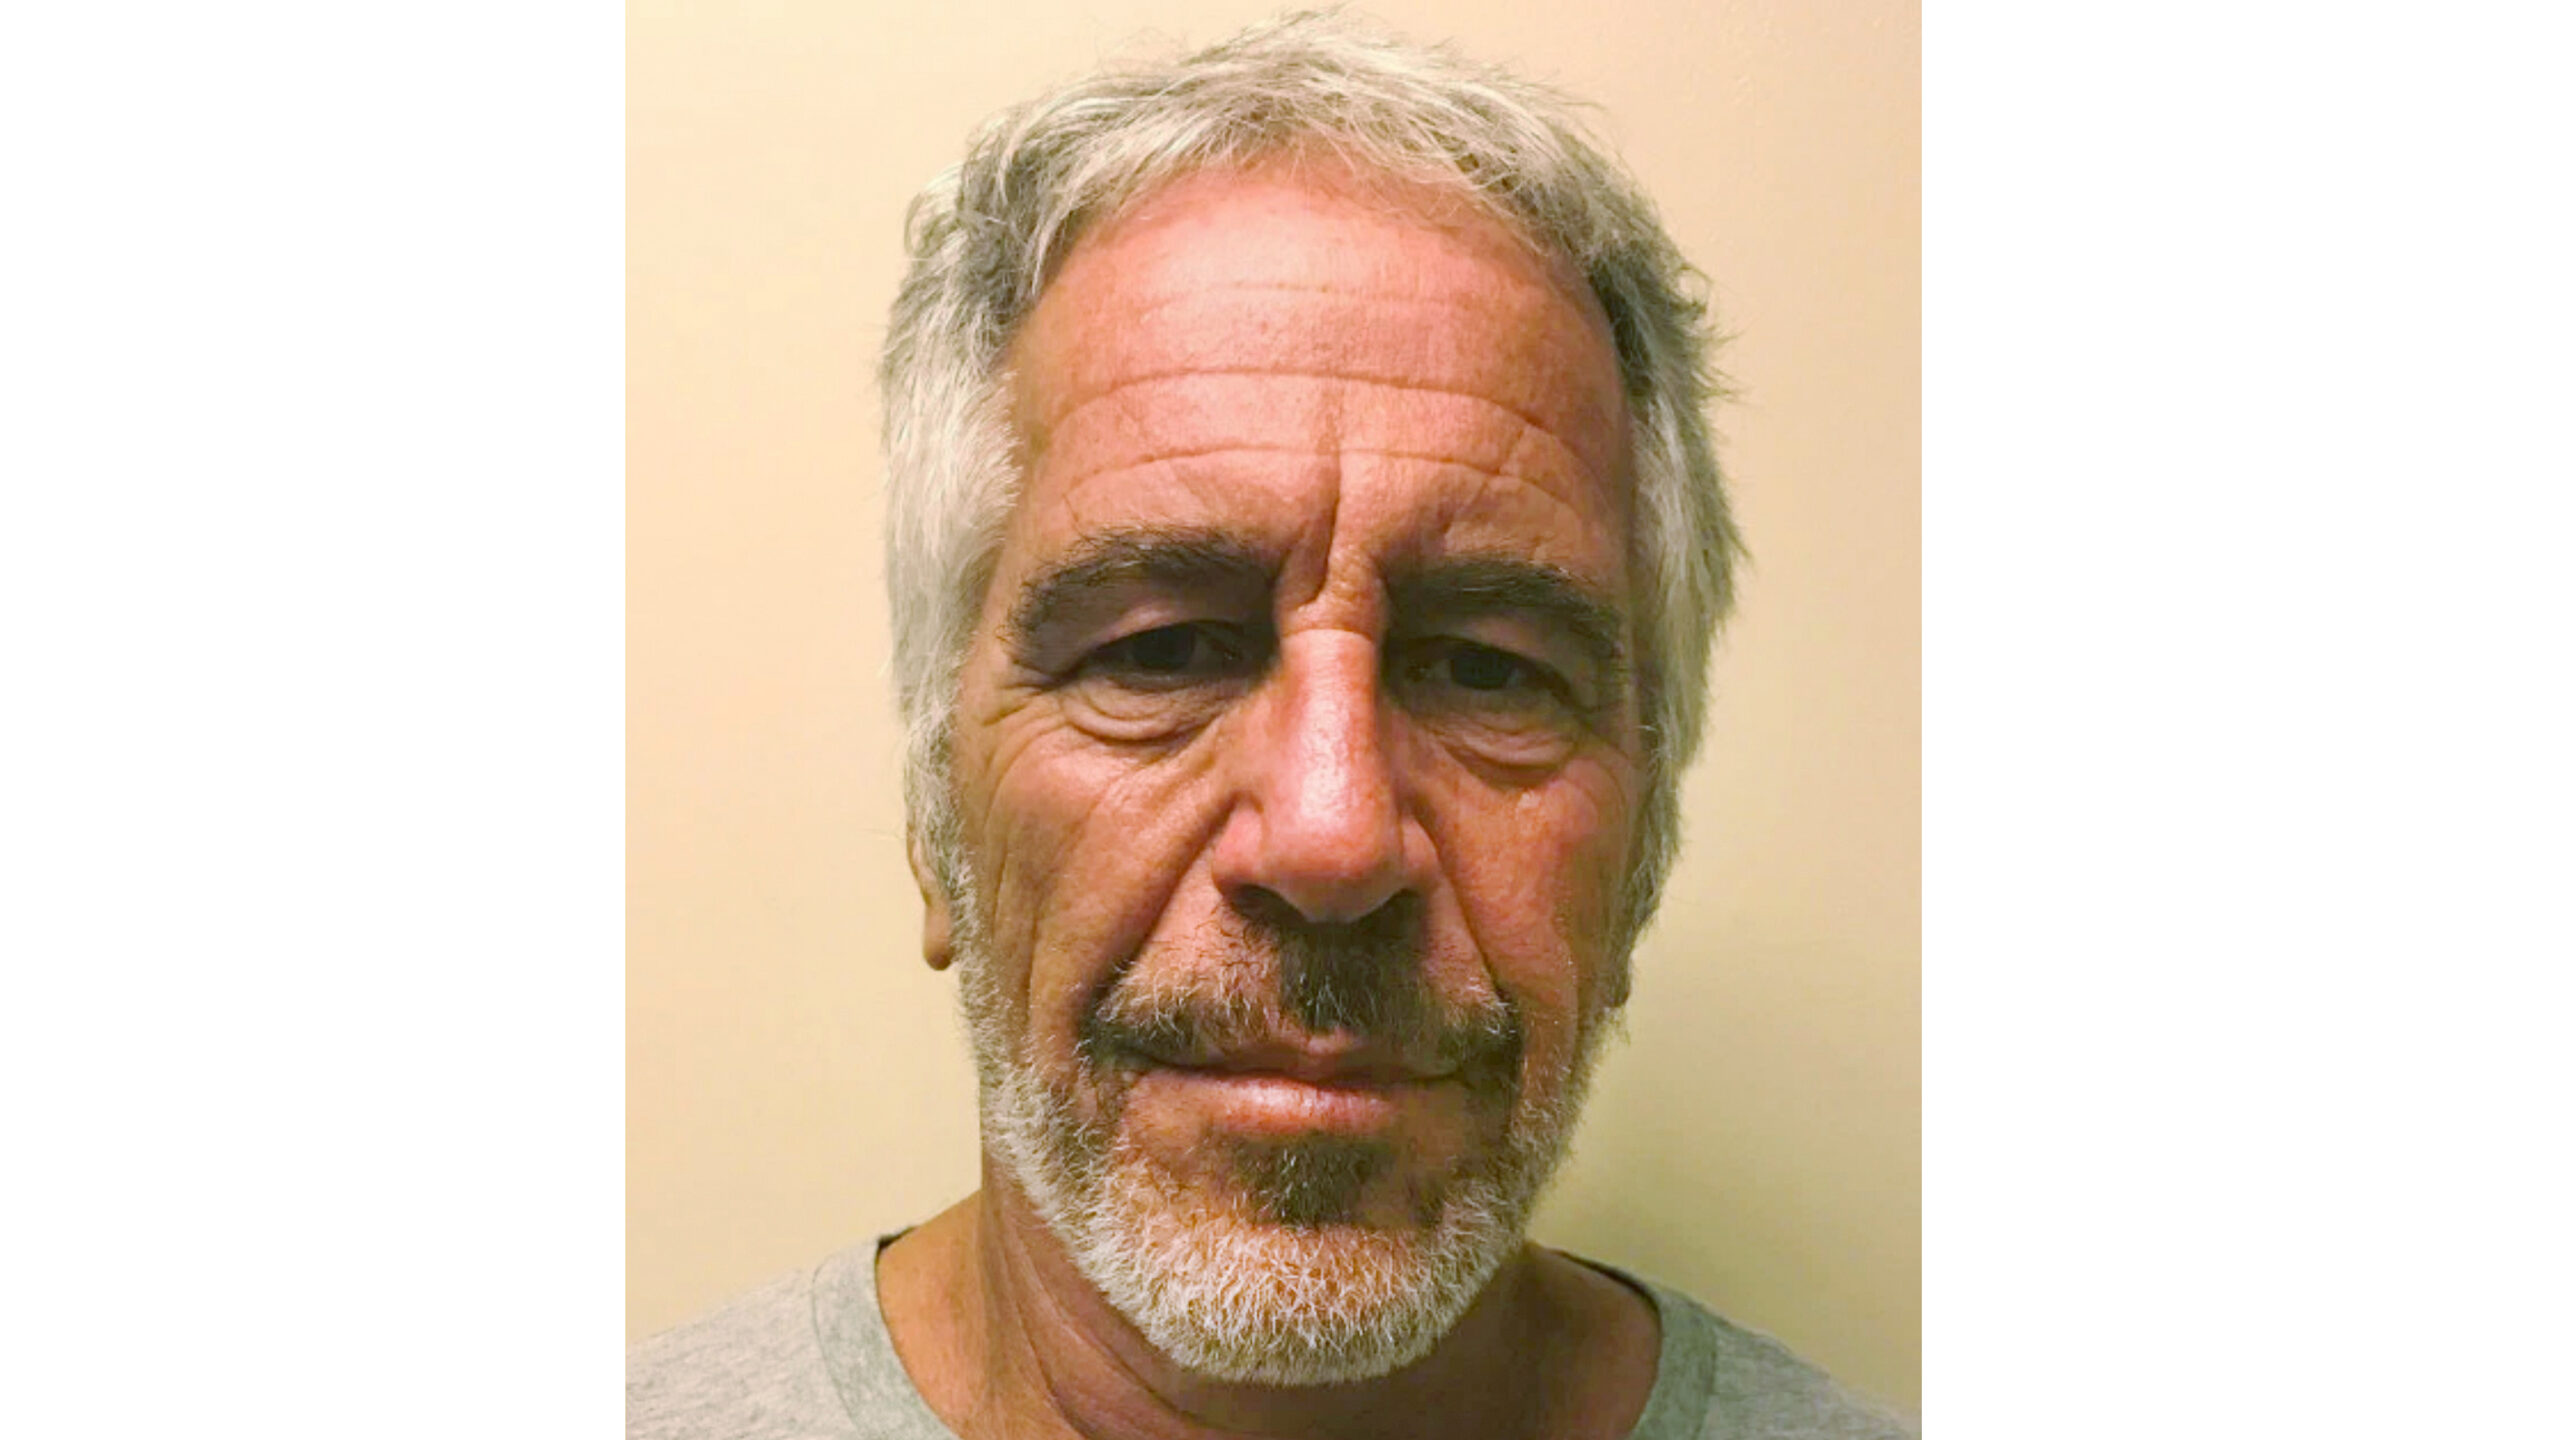 Up First briefing: Epstein documents released; blasts in Iran raise Mideast fears